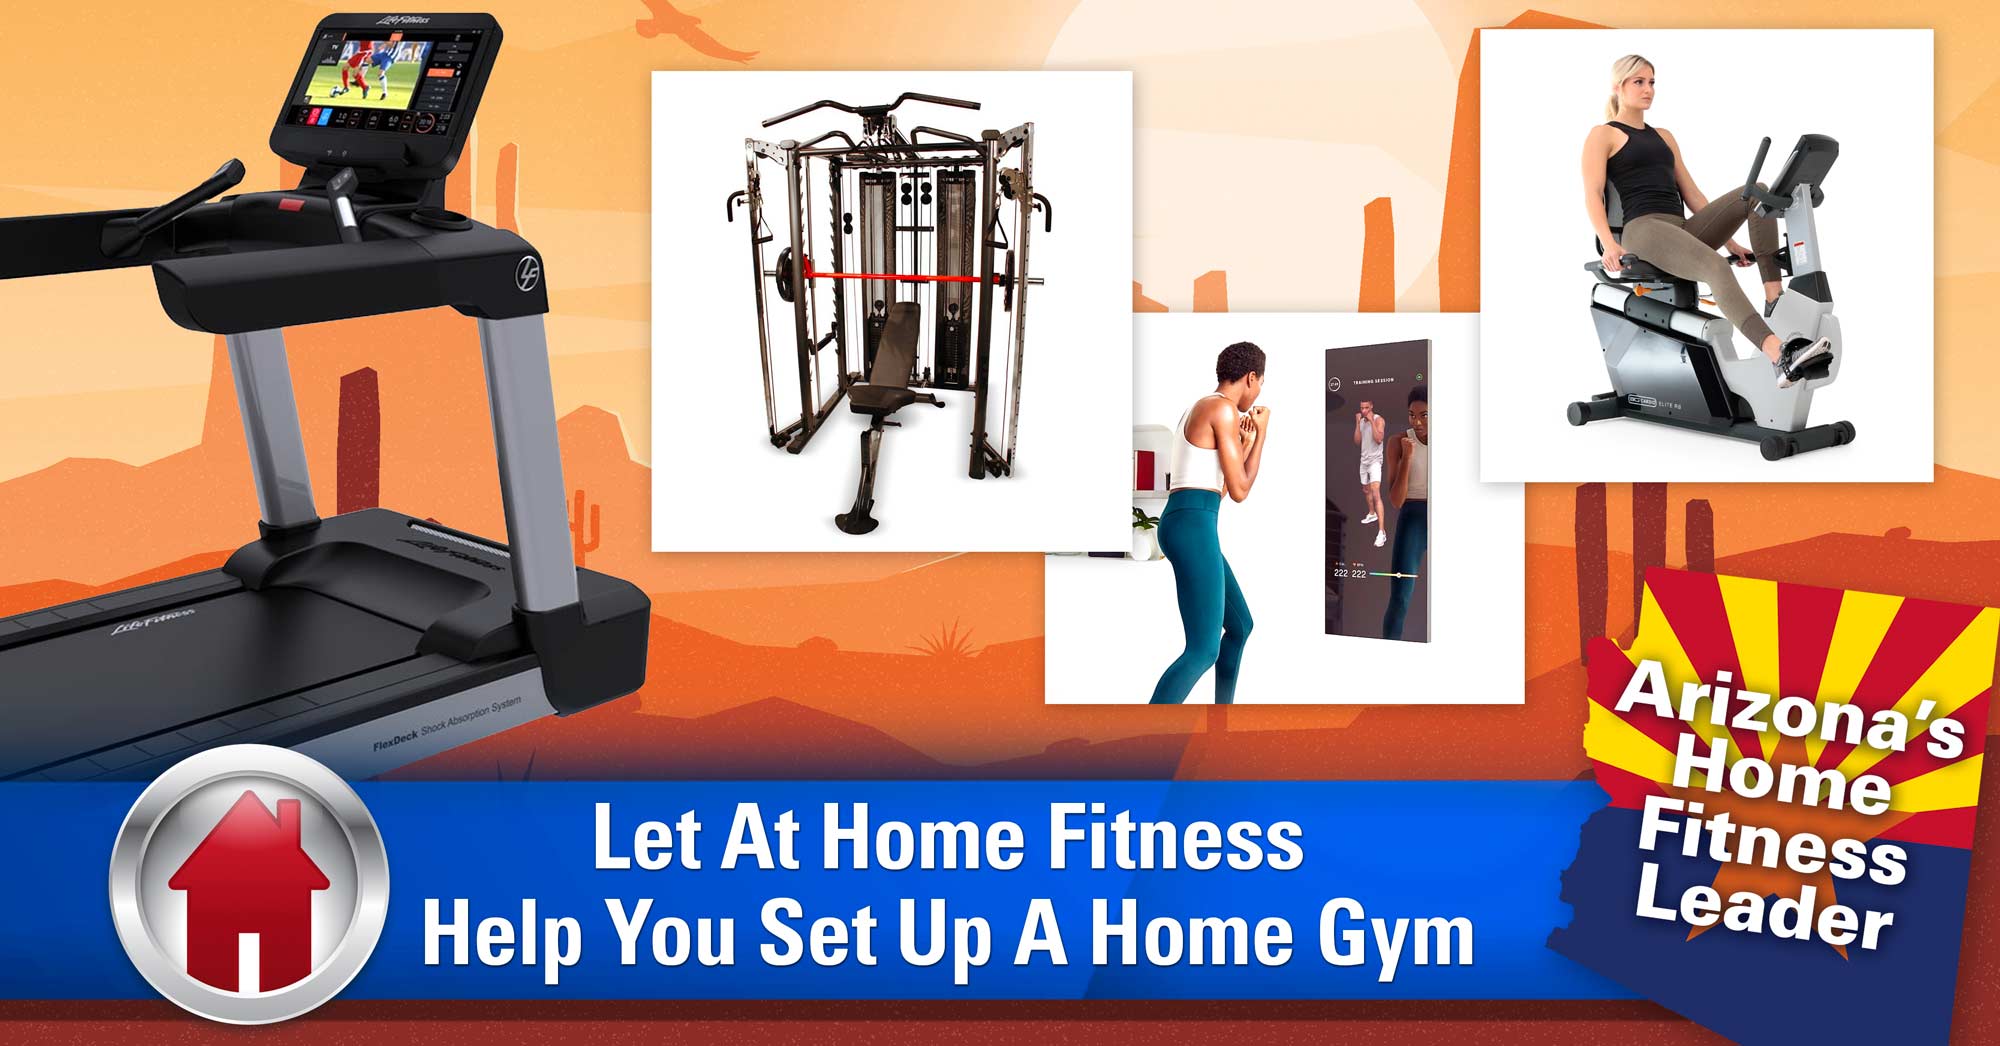 Let At Home Fitness Help You Set Up A Home Gym